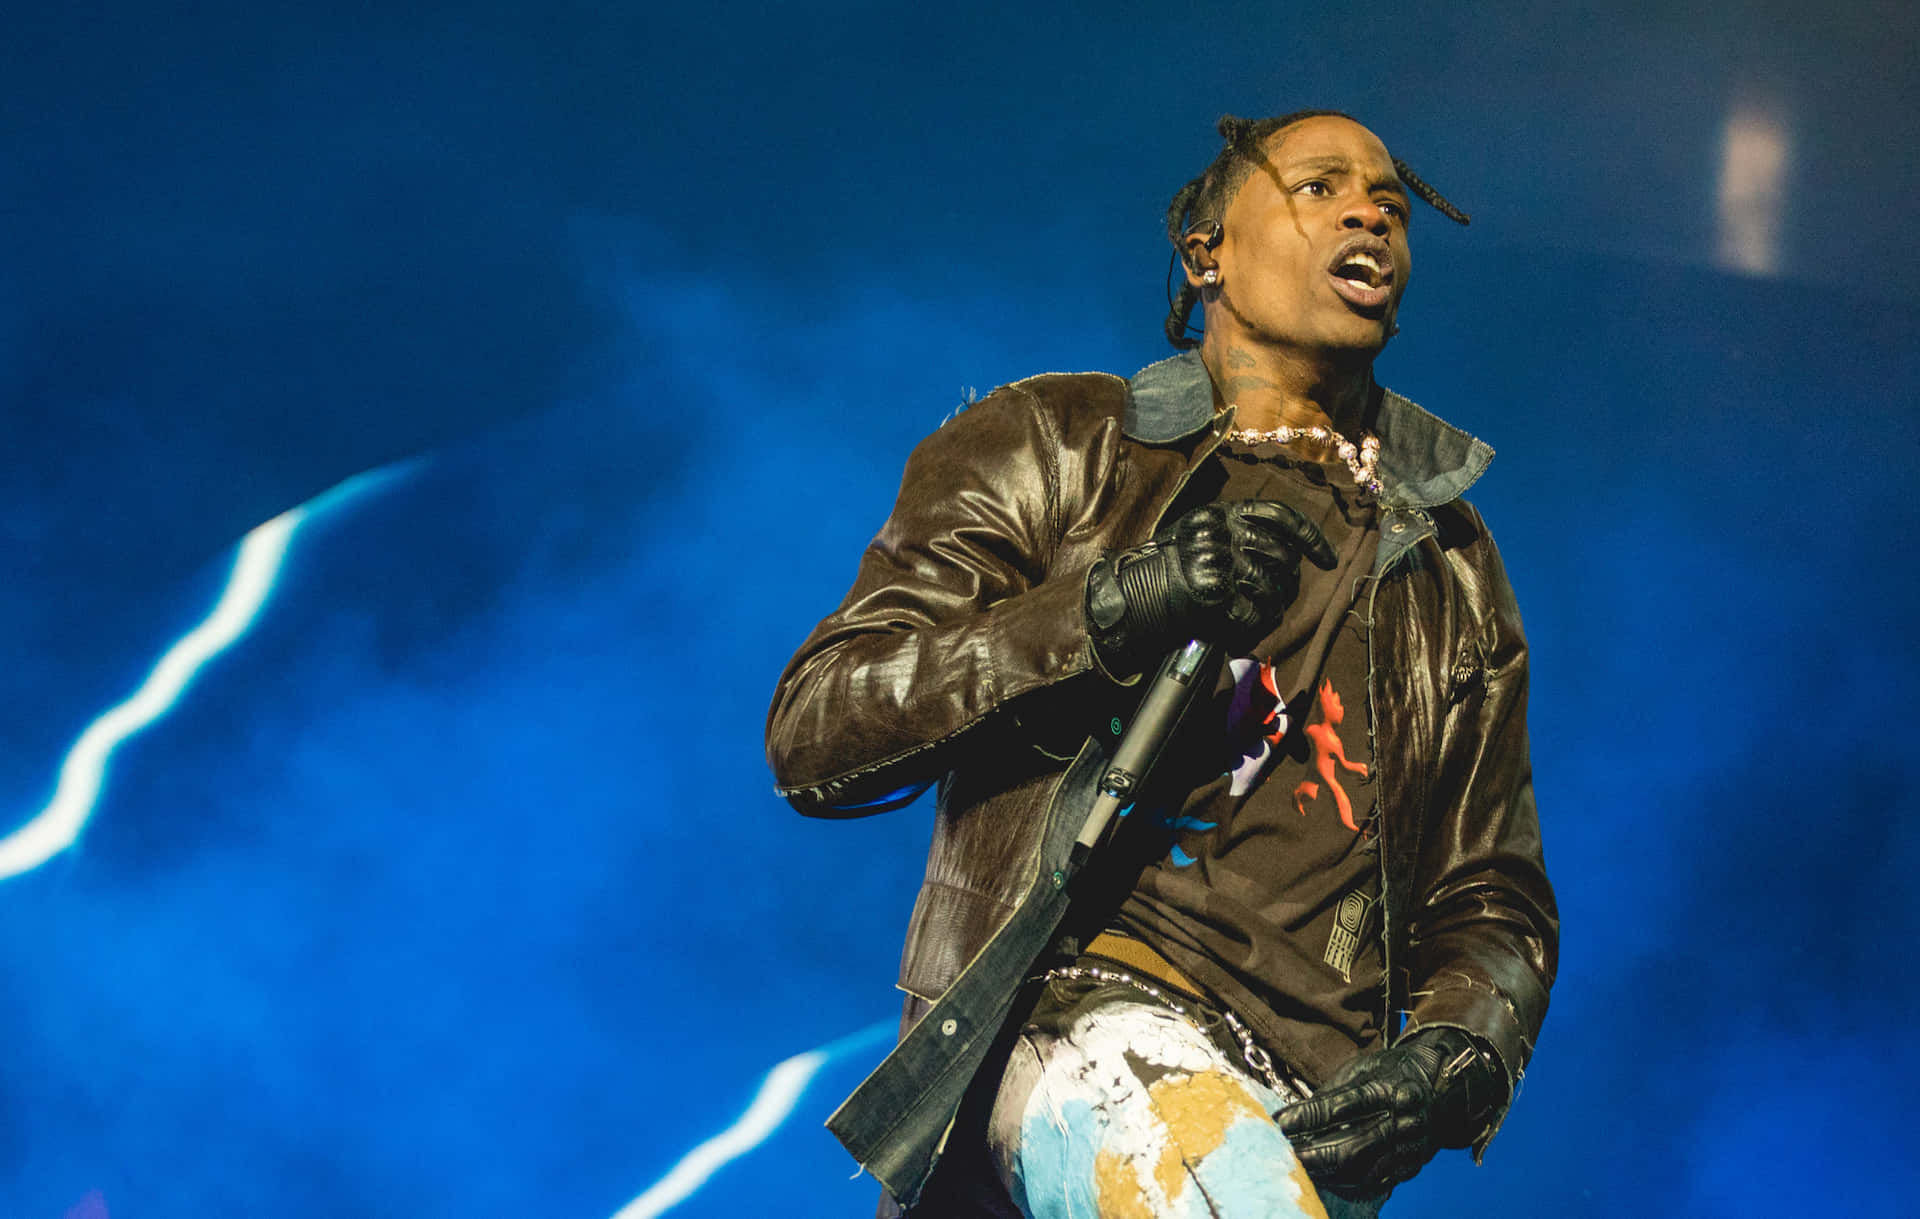 Rapper and Producer Travis Scott On Stage